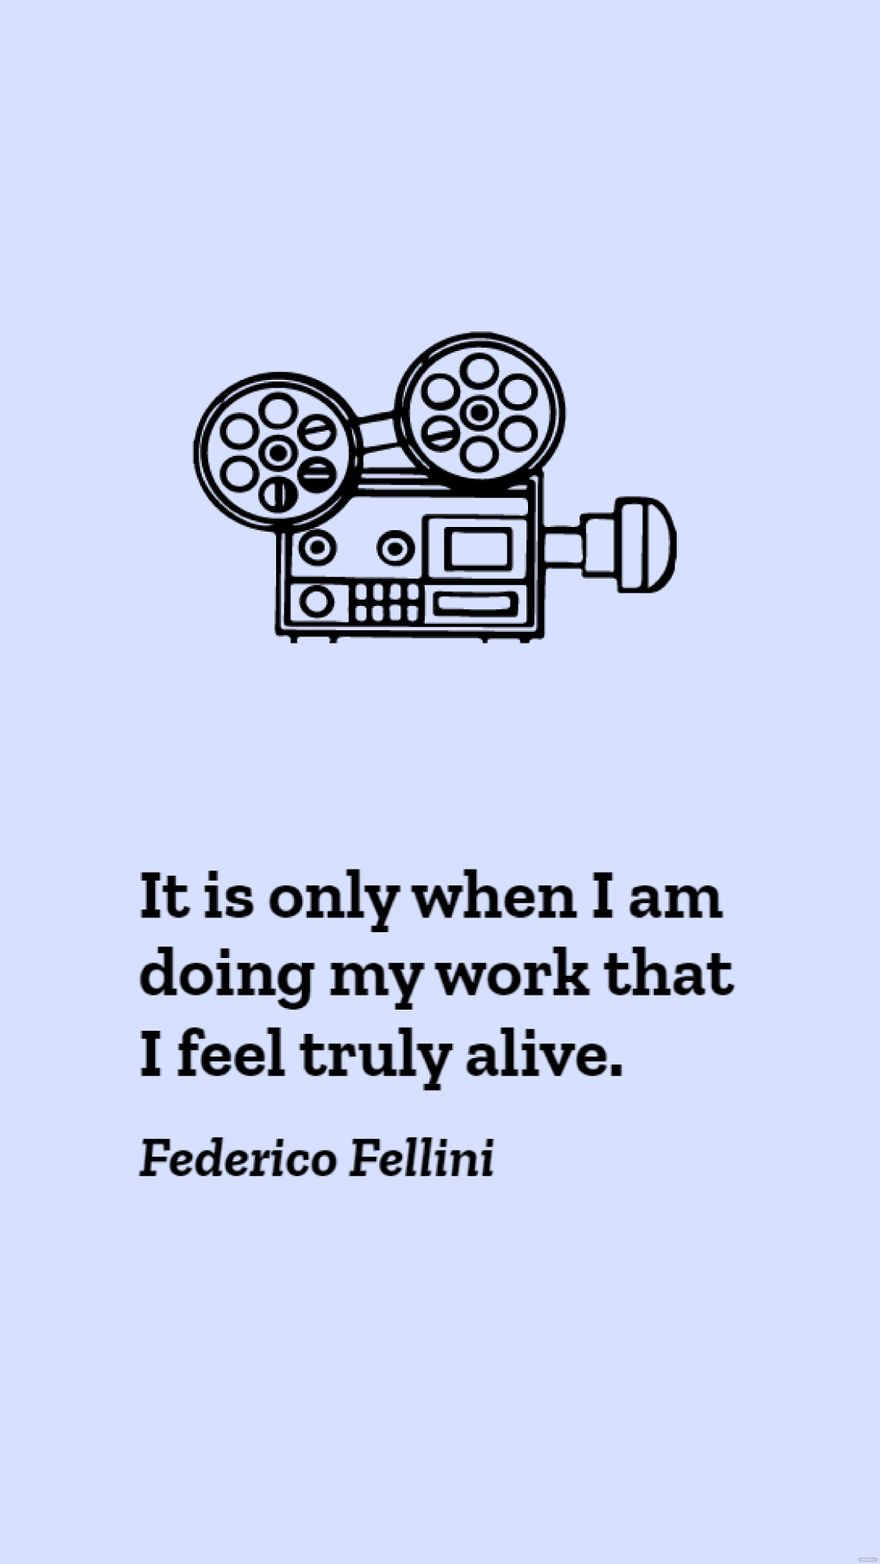 Free Federico Fellini - It is only when I am doing my work that I feel truly alive. in JPG